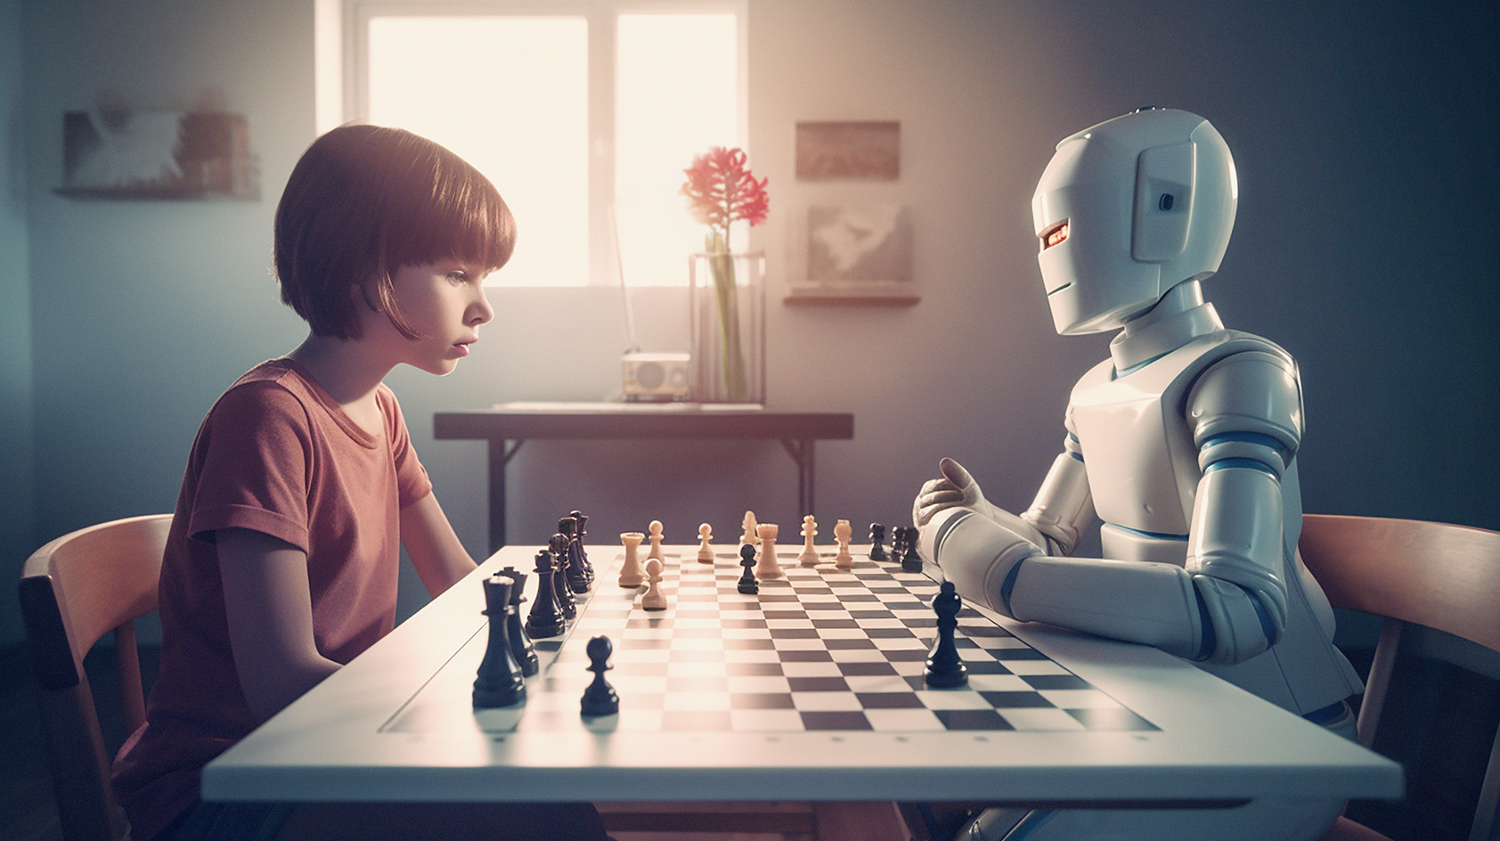 child and robot sit at chess table playing game